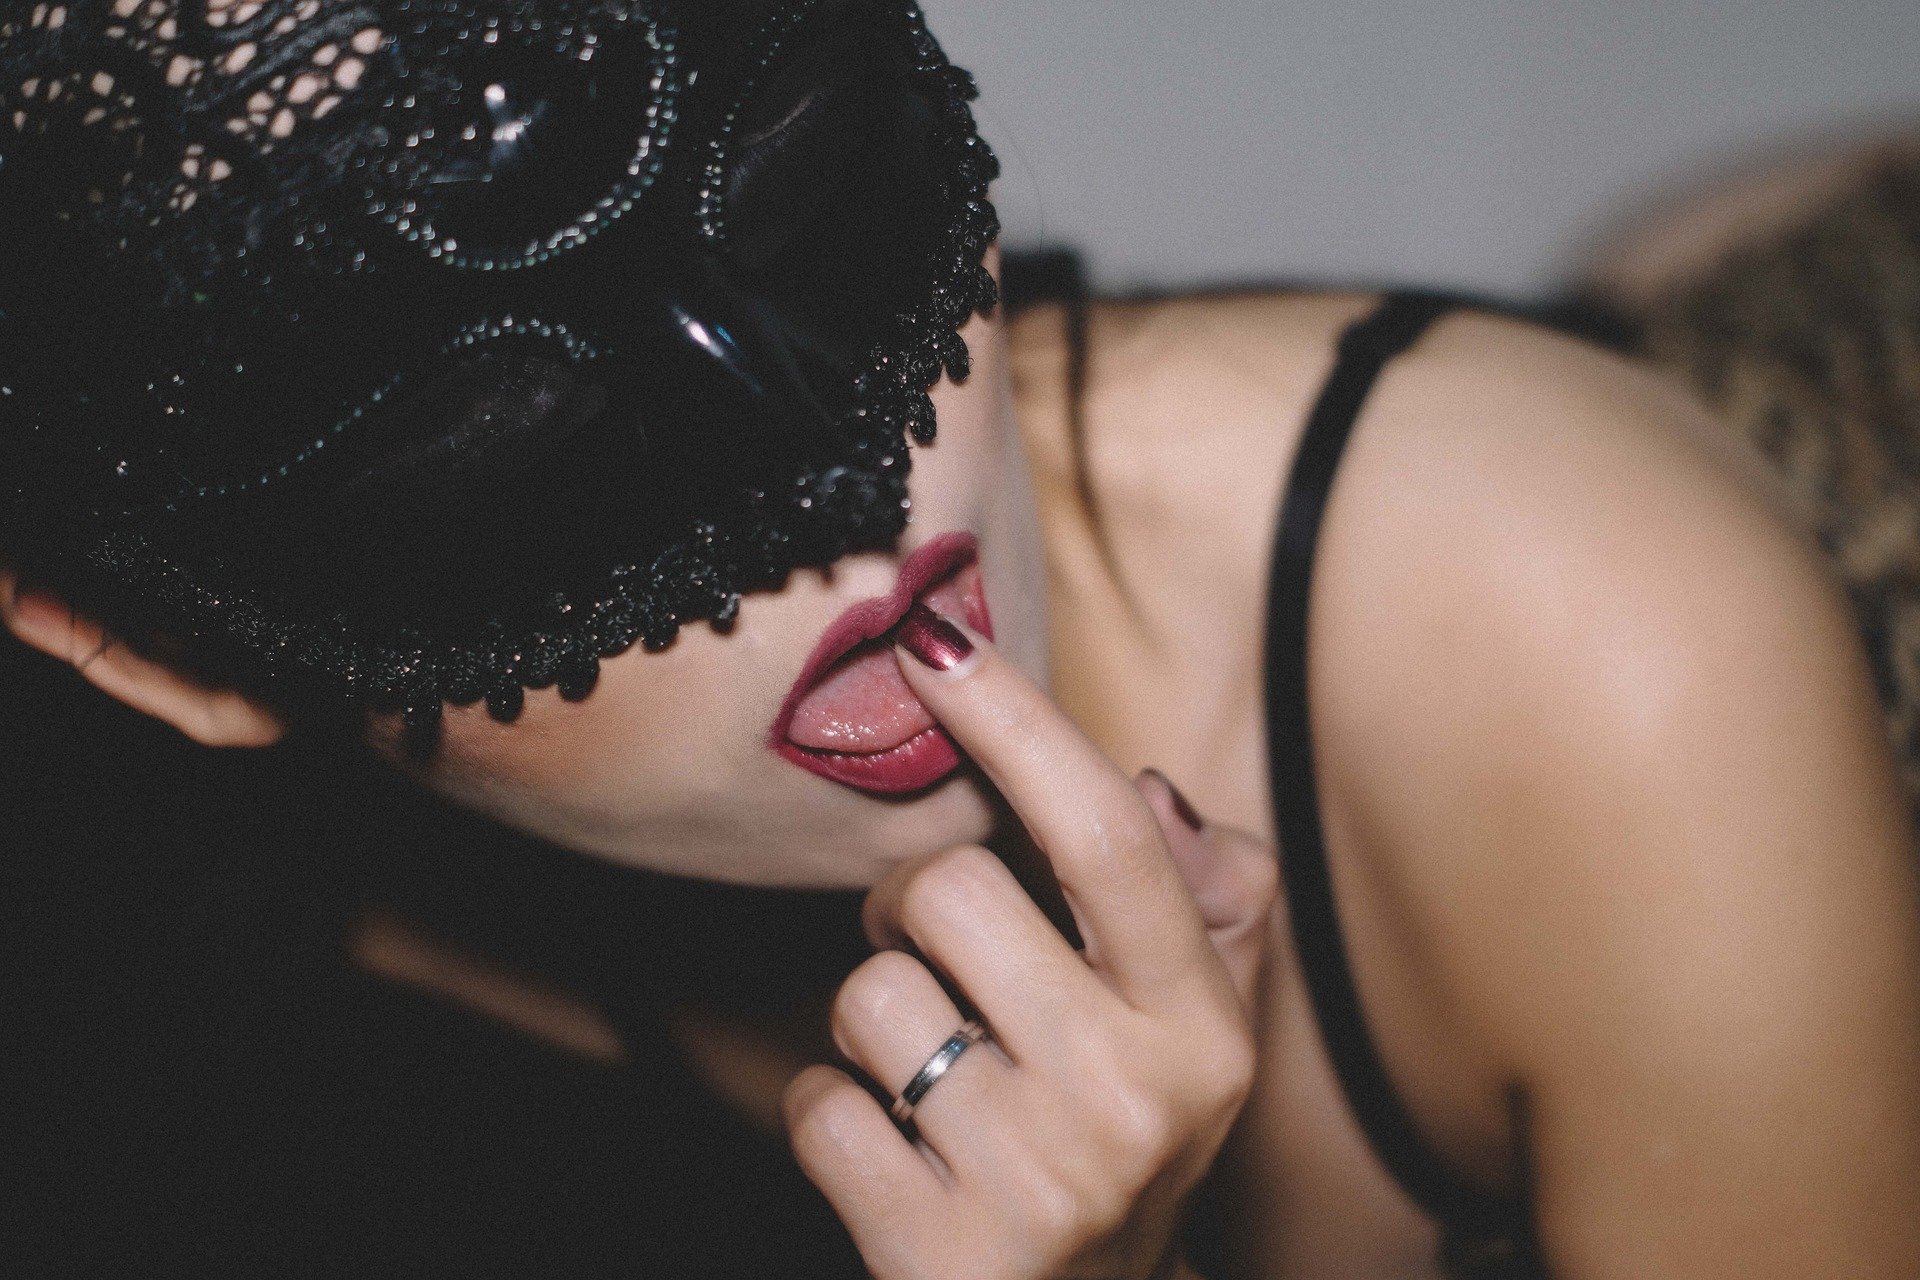 6 Things Women Hate During Oral